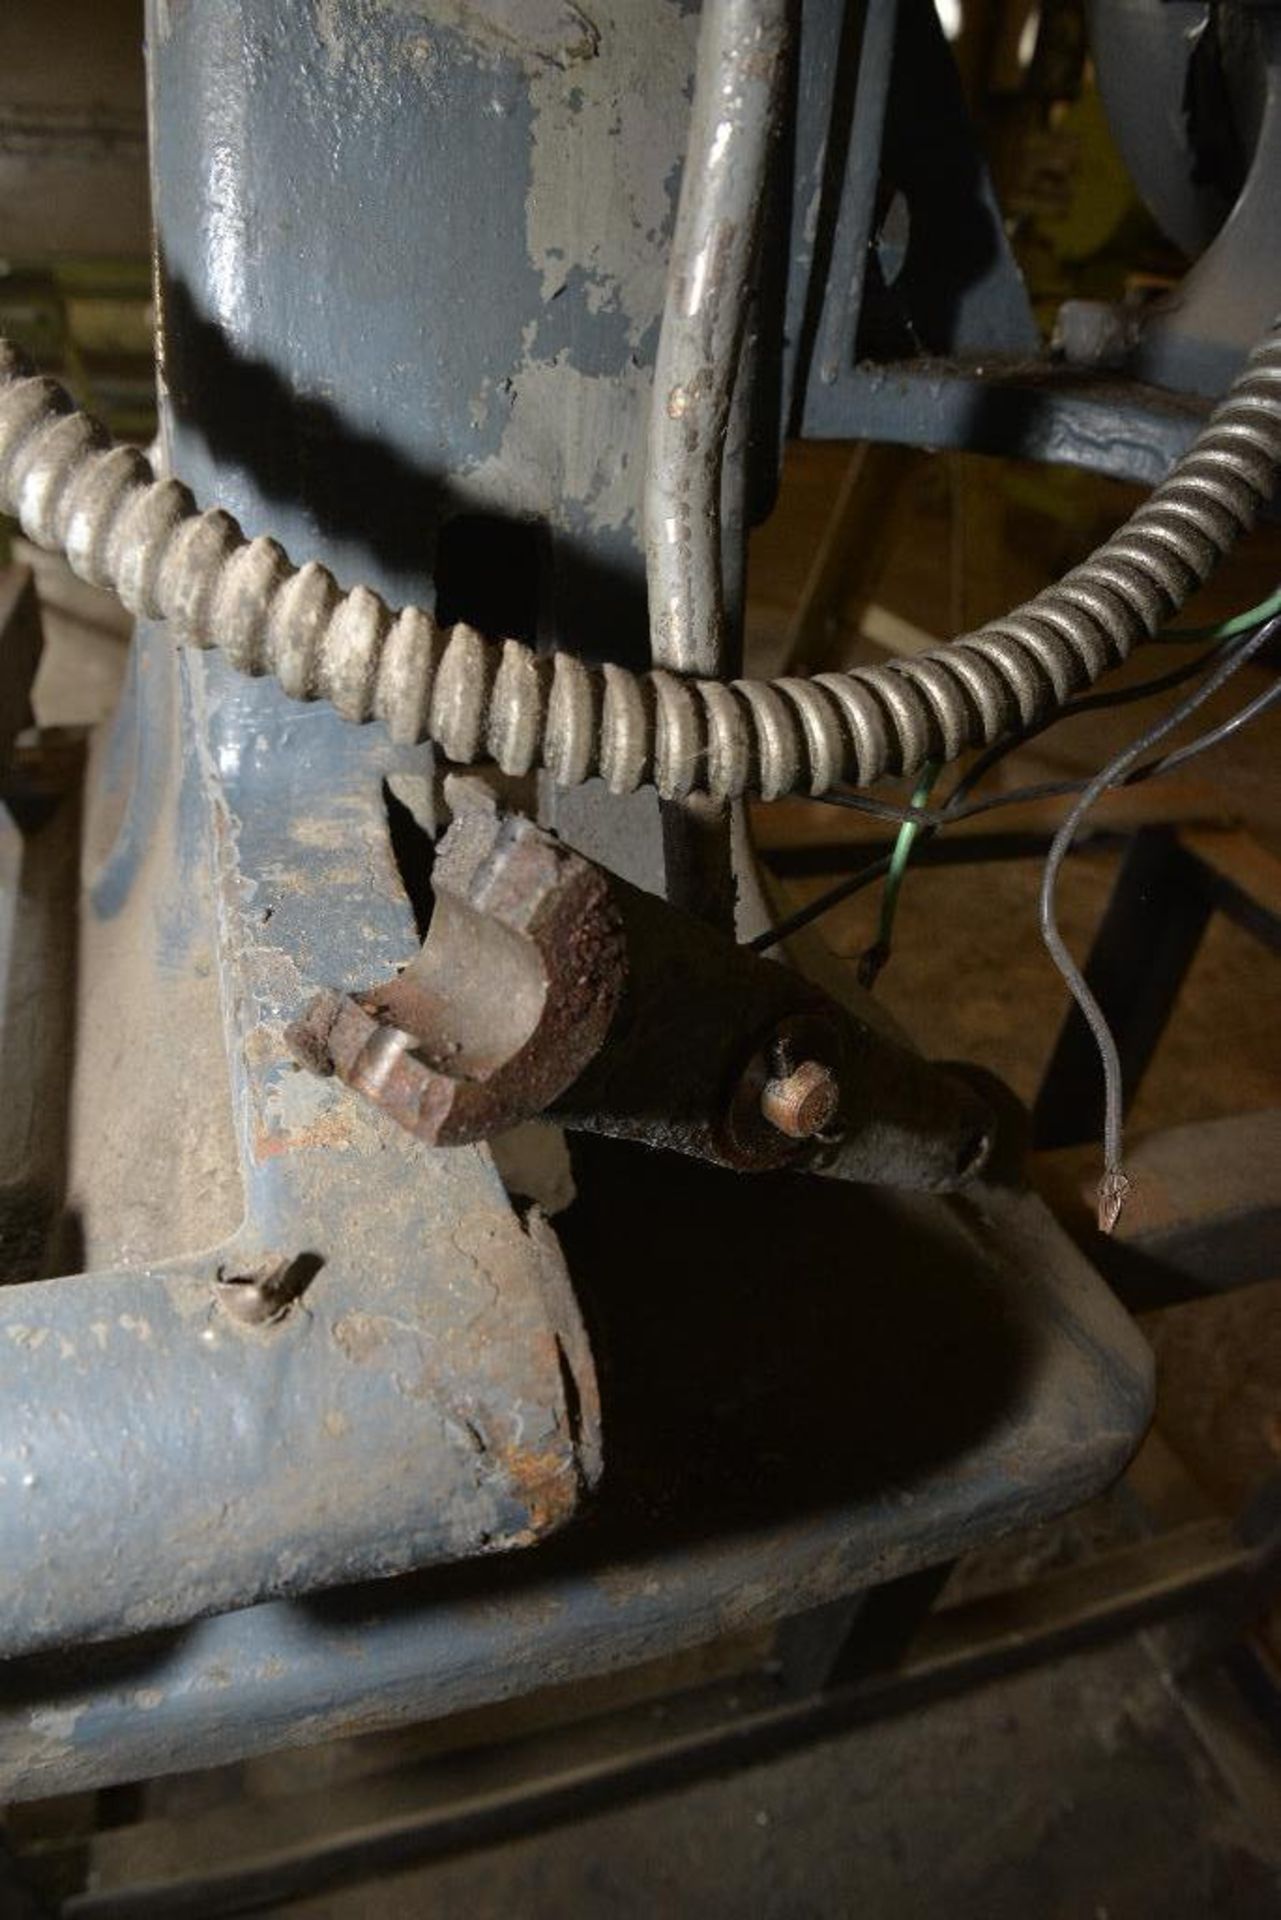 NIAGARA ROTARY MACHINE WELDED ON ROLLING STAND ARM HAS BEEN BROKEN & REWELDED - Image 11 of 11